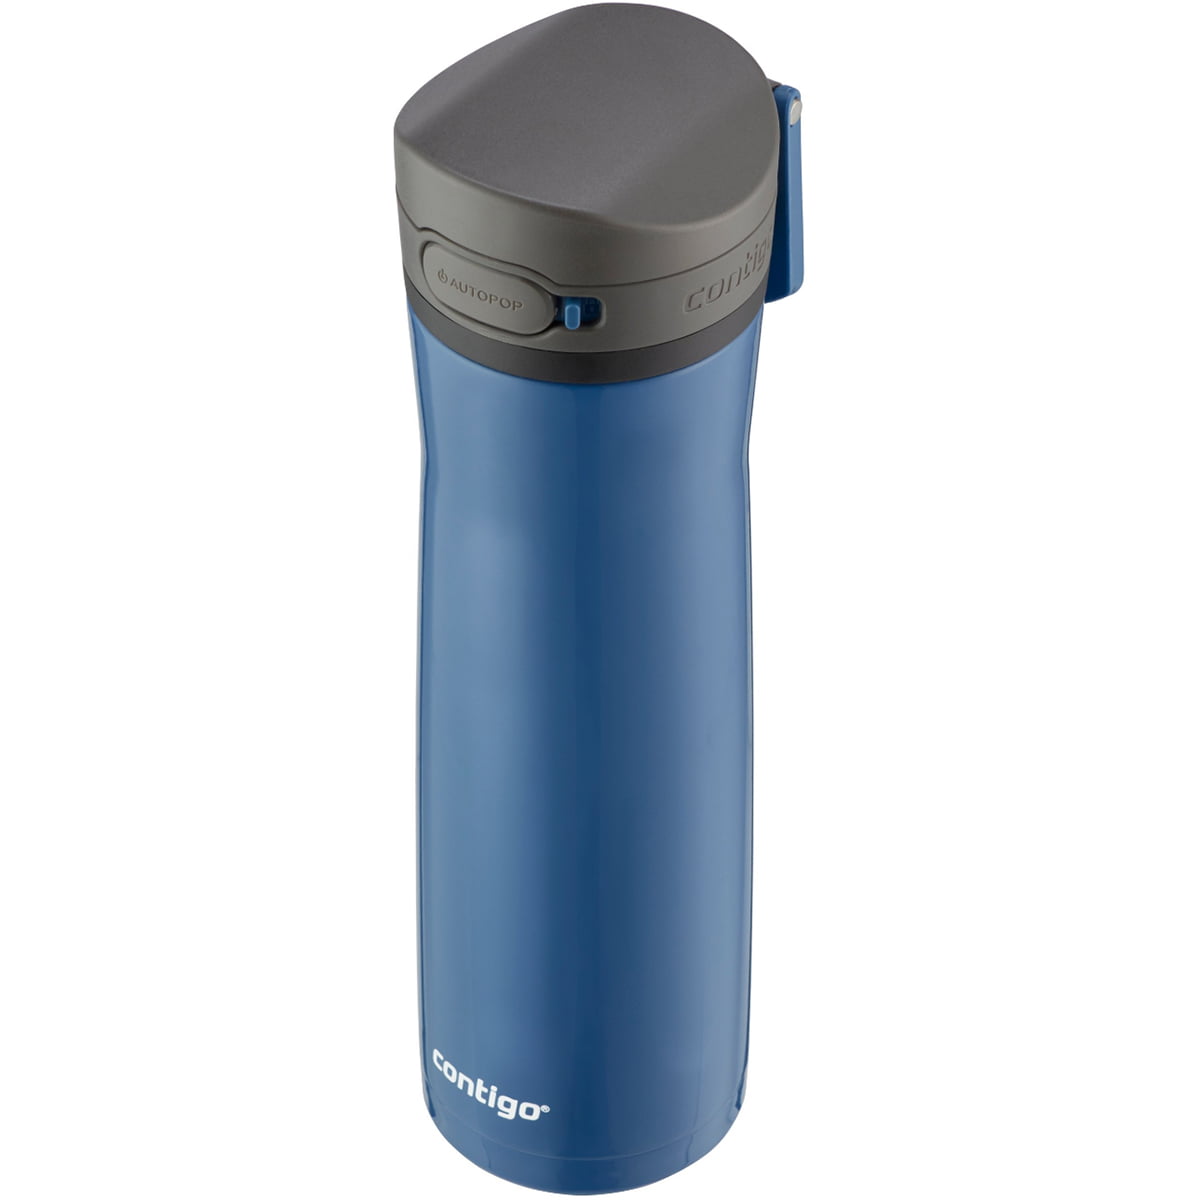  Contigo Jackson Chill 2.0 Vacuum-Insulated Stainless Steel  Water Bottle, Secure Lid Technology & Cortland Chill 2.0 Stainless Steel  Vacuum-Insulated Water Bottle with Spill-Proof Lid, Blueberry: Home &  Kitchen